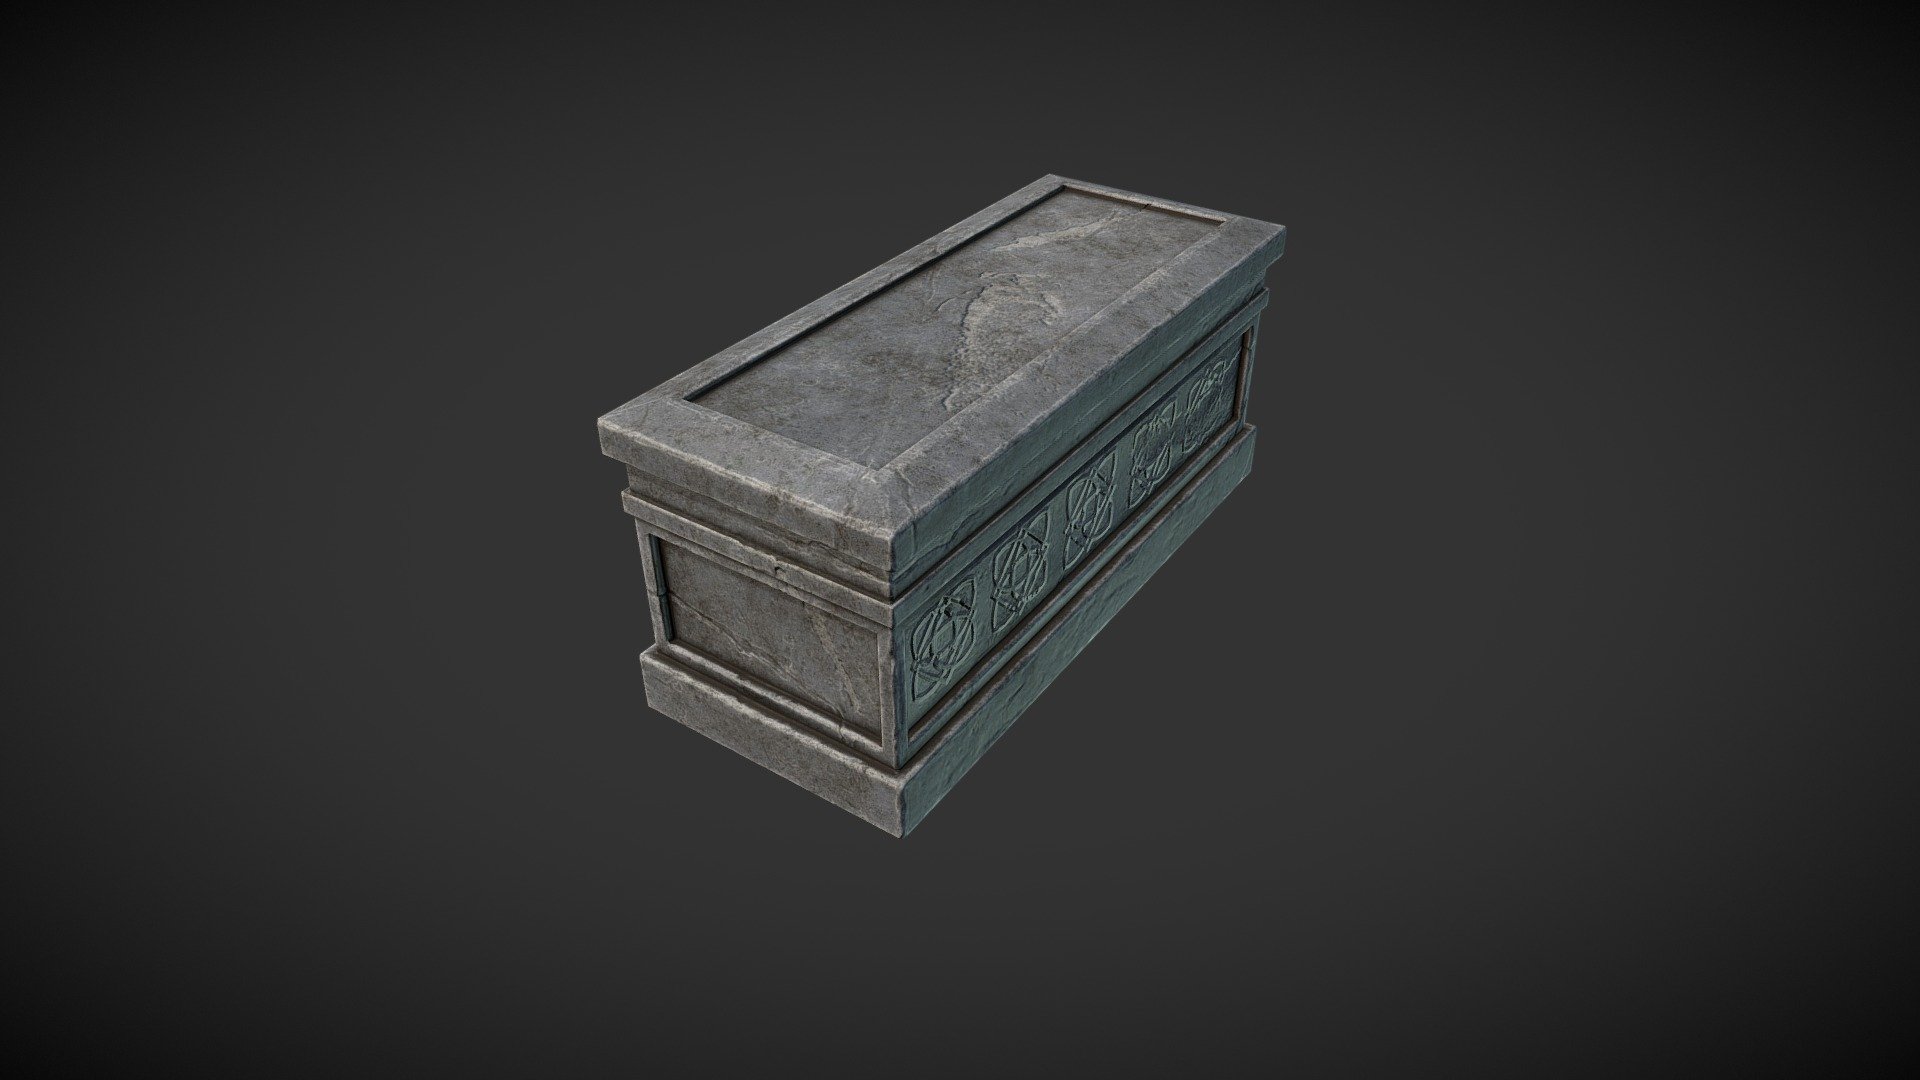 New asset for Unity3d engine - CoffinClosed - 3D model by UHO Development (@MaxWormsHd) 3d model